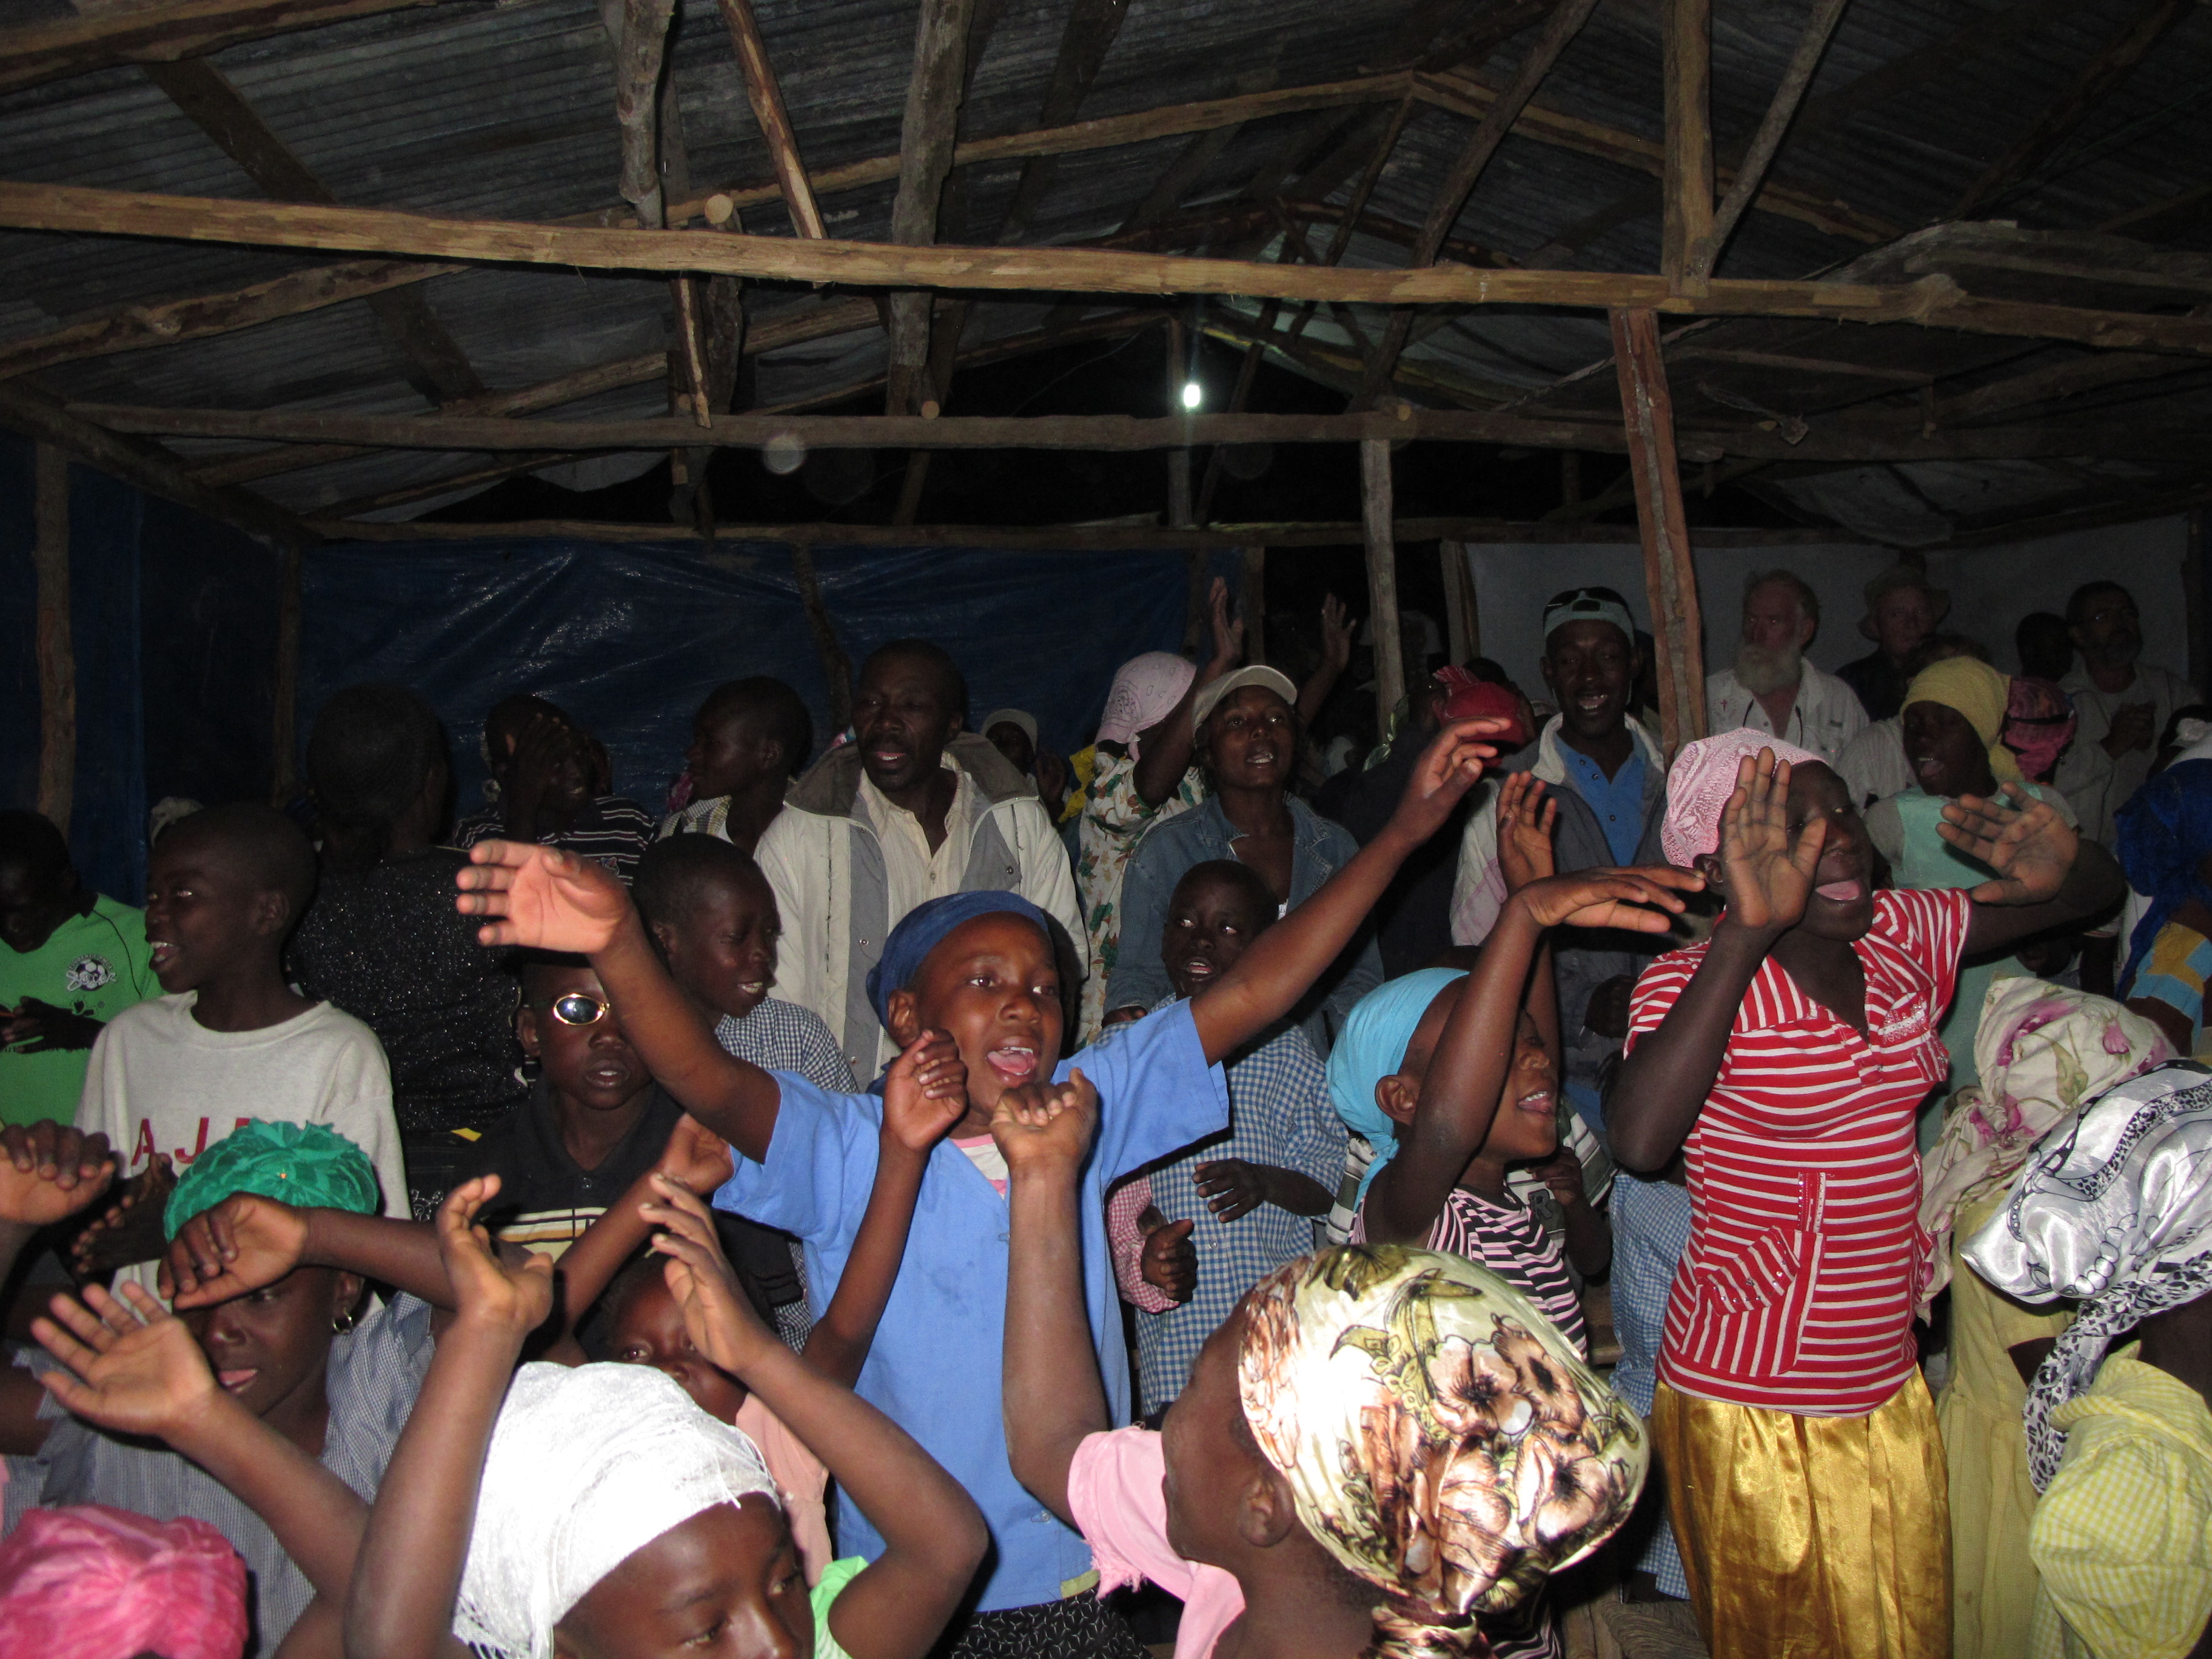 Praising the Lord with the children and people of Chapelle.